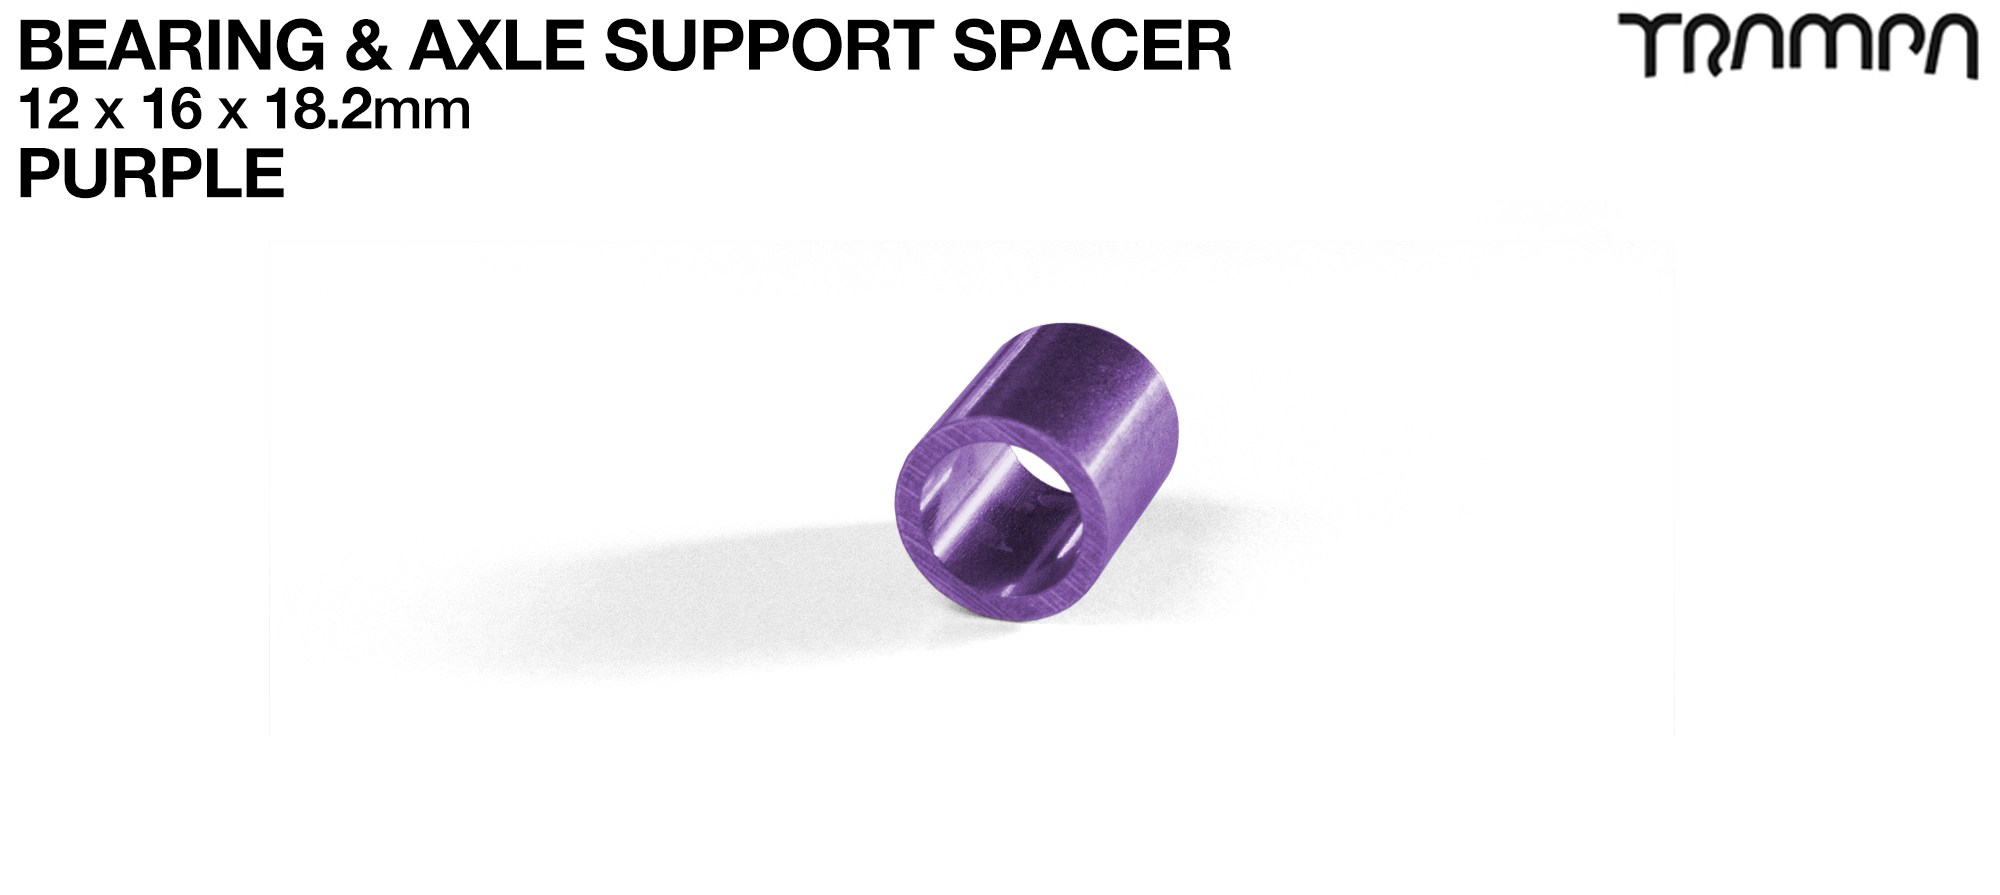 18.2mm Wheel Support Spacers - PURPLE 